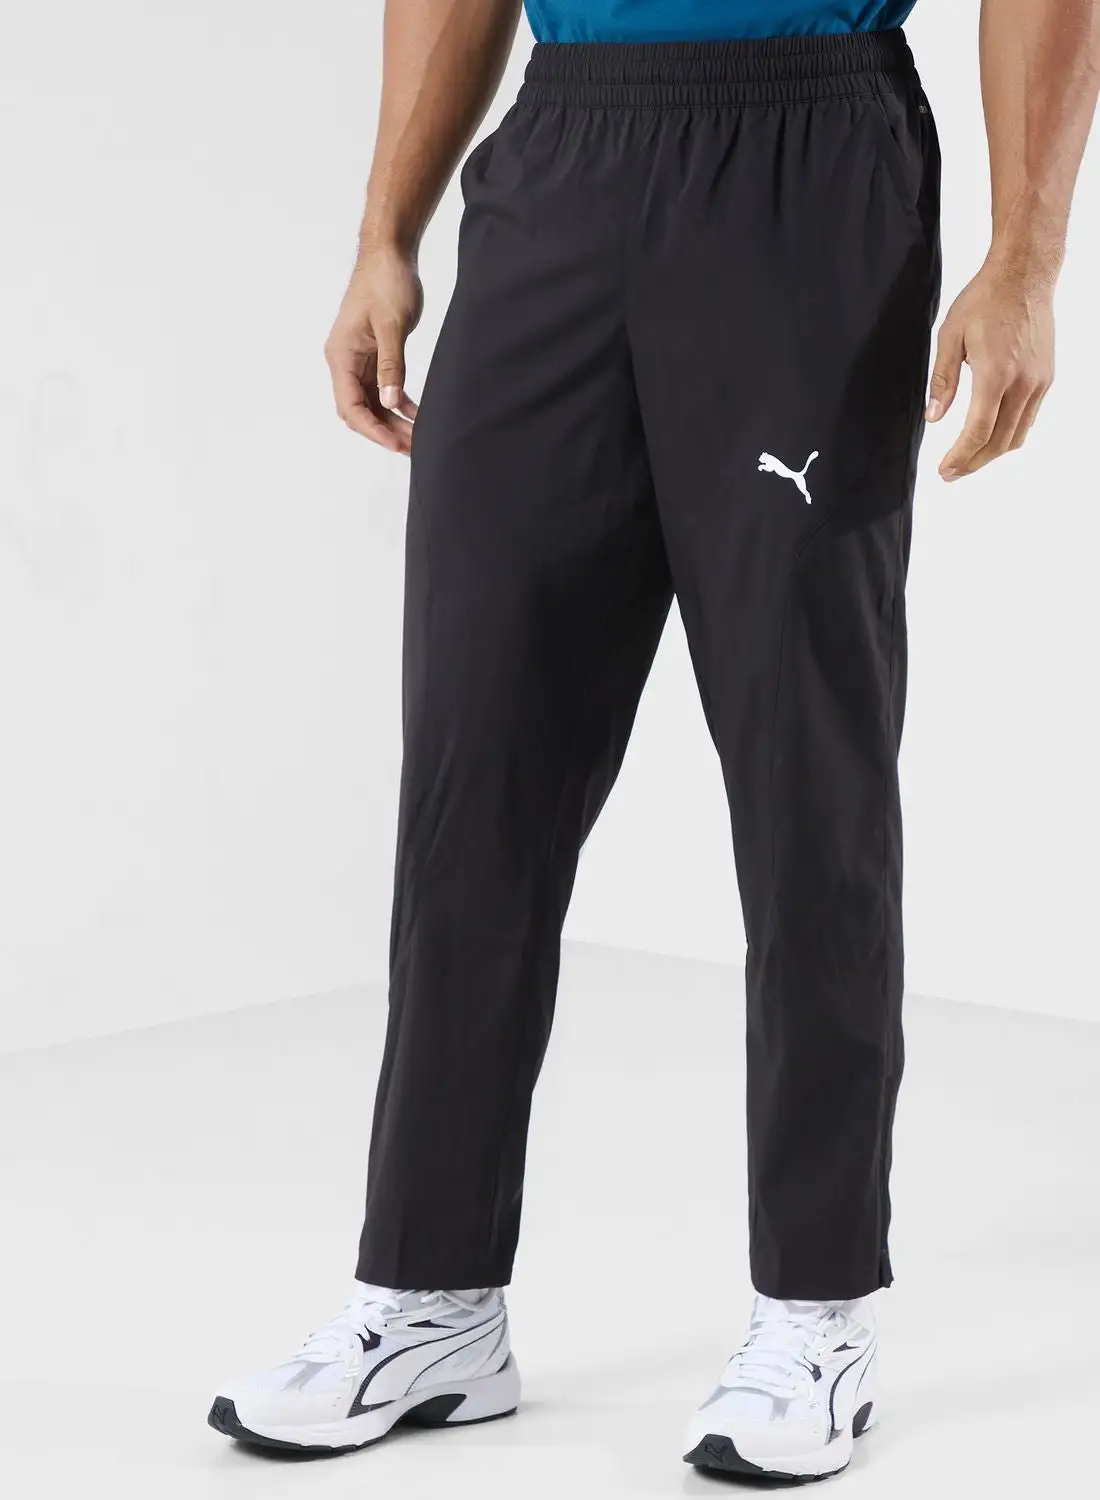 PUMA Woven Tapered Fit Pants